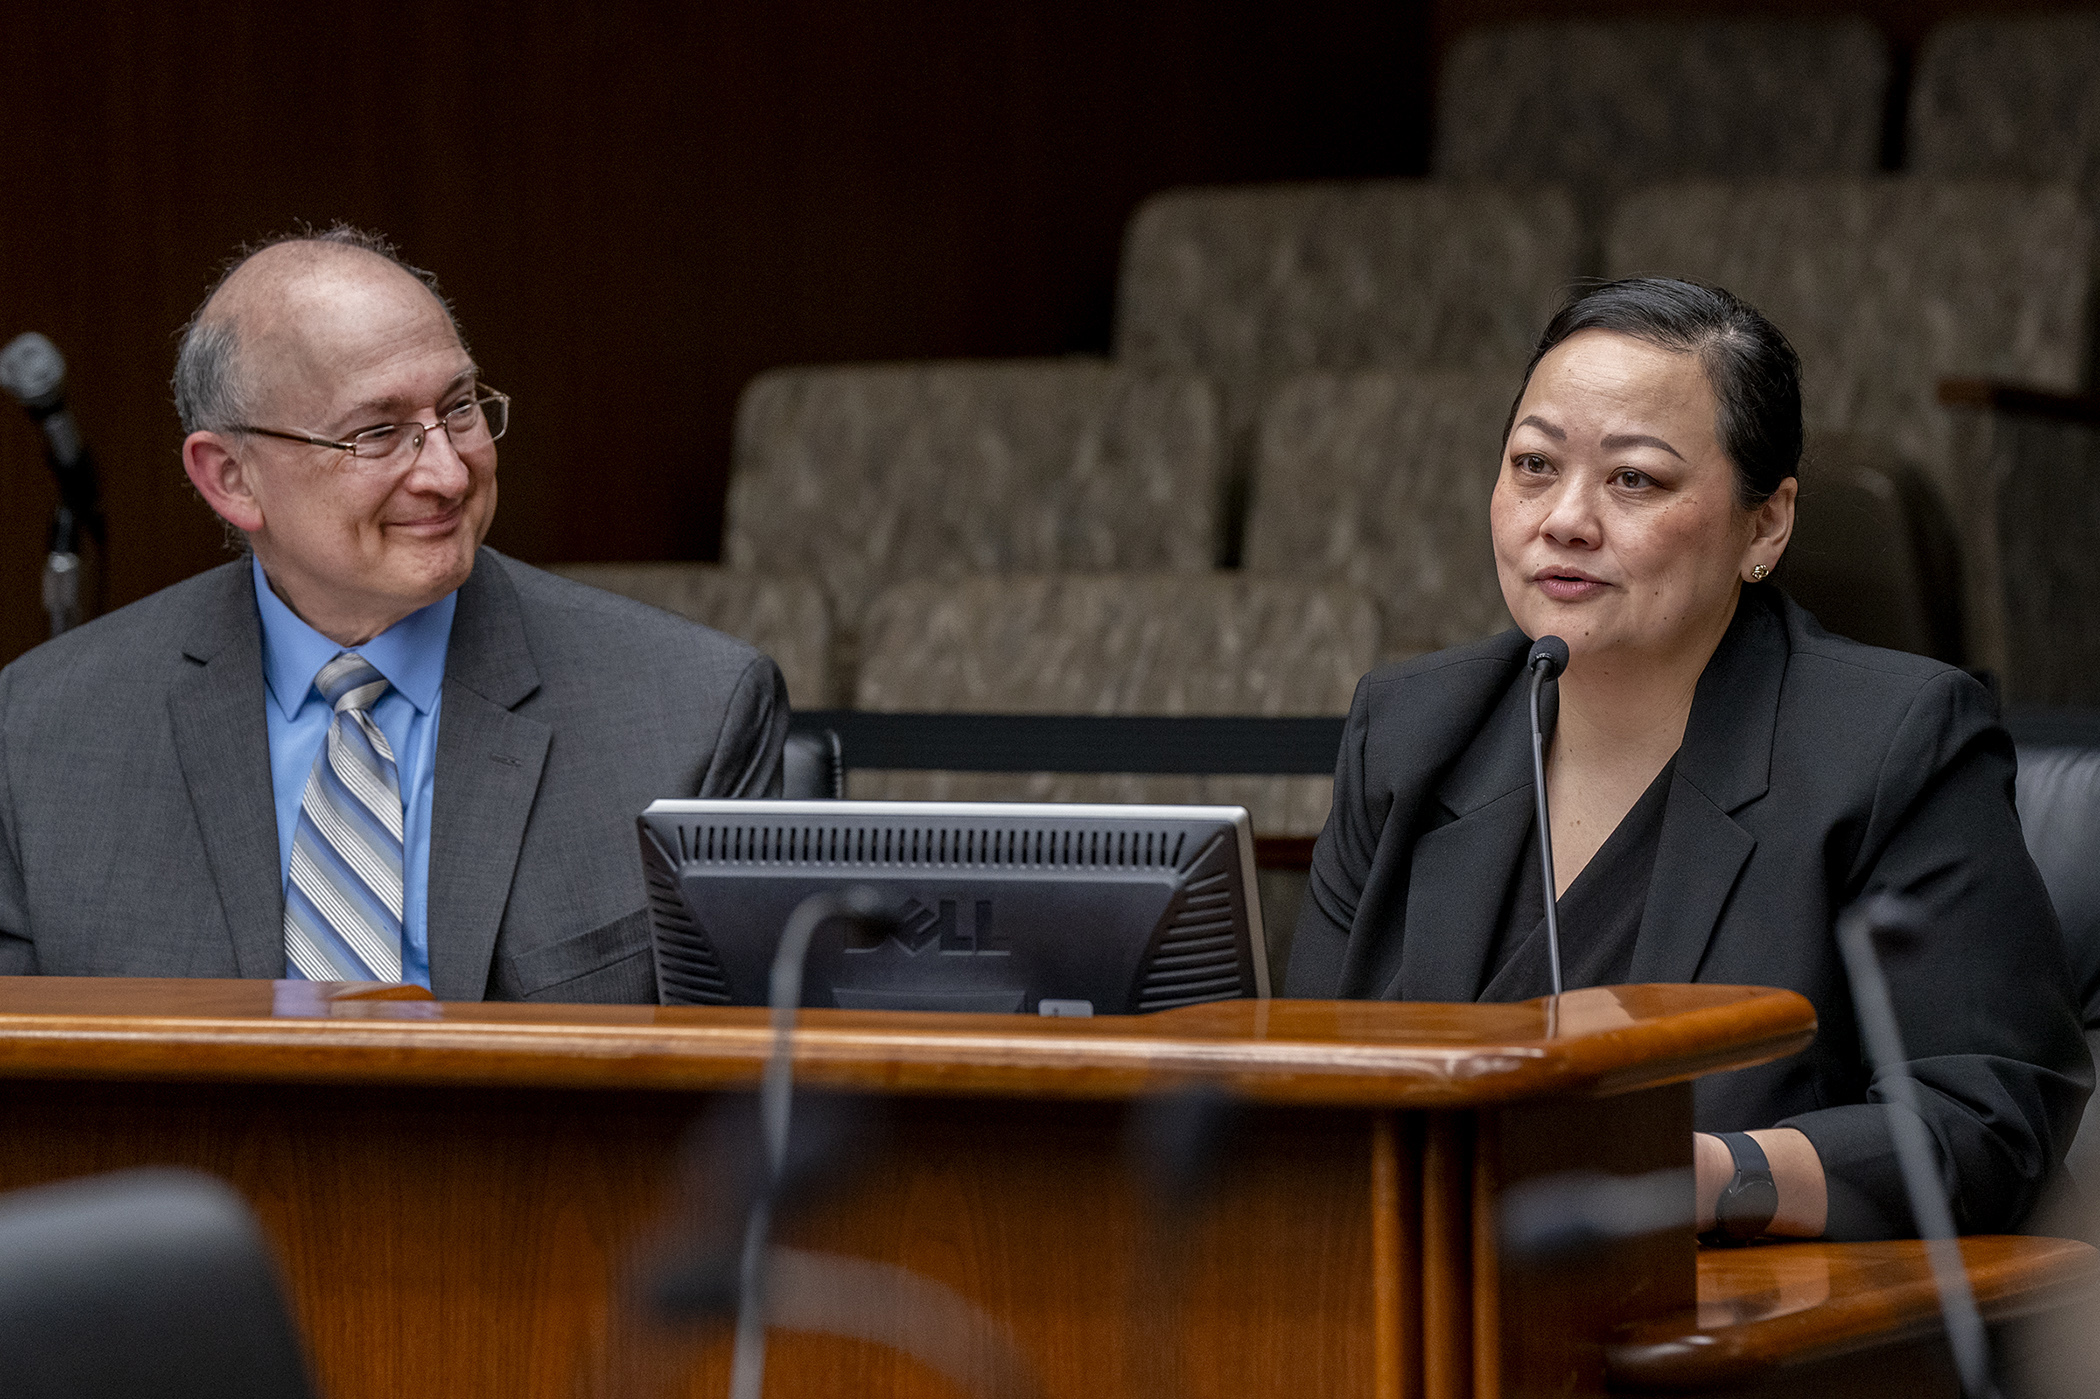 Pahoua Yang, vice president of community health and wellness at the Wilder Foundation, testifies before the House Human Services Policy Committee regarding HF3495, sponsored by Rep. Peter Fischer, left. (Photo by Michele Jokinen)